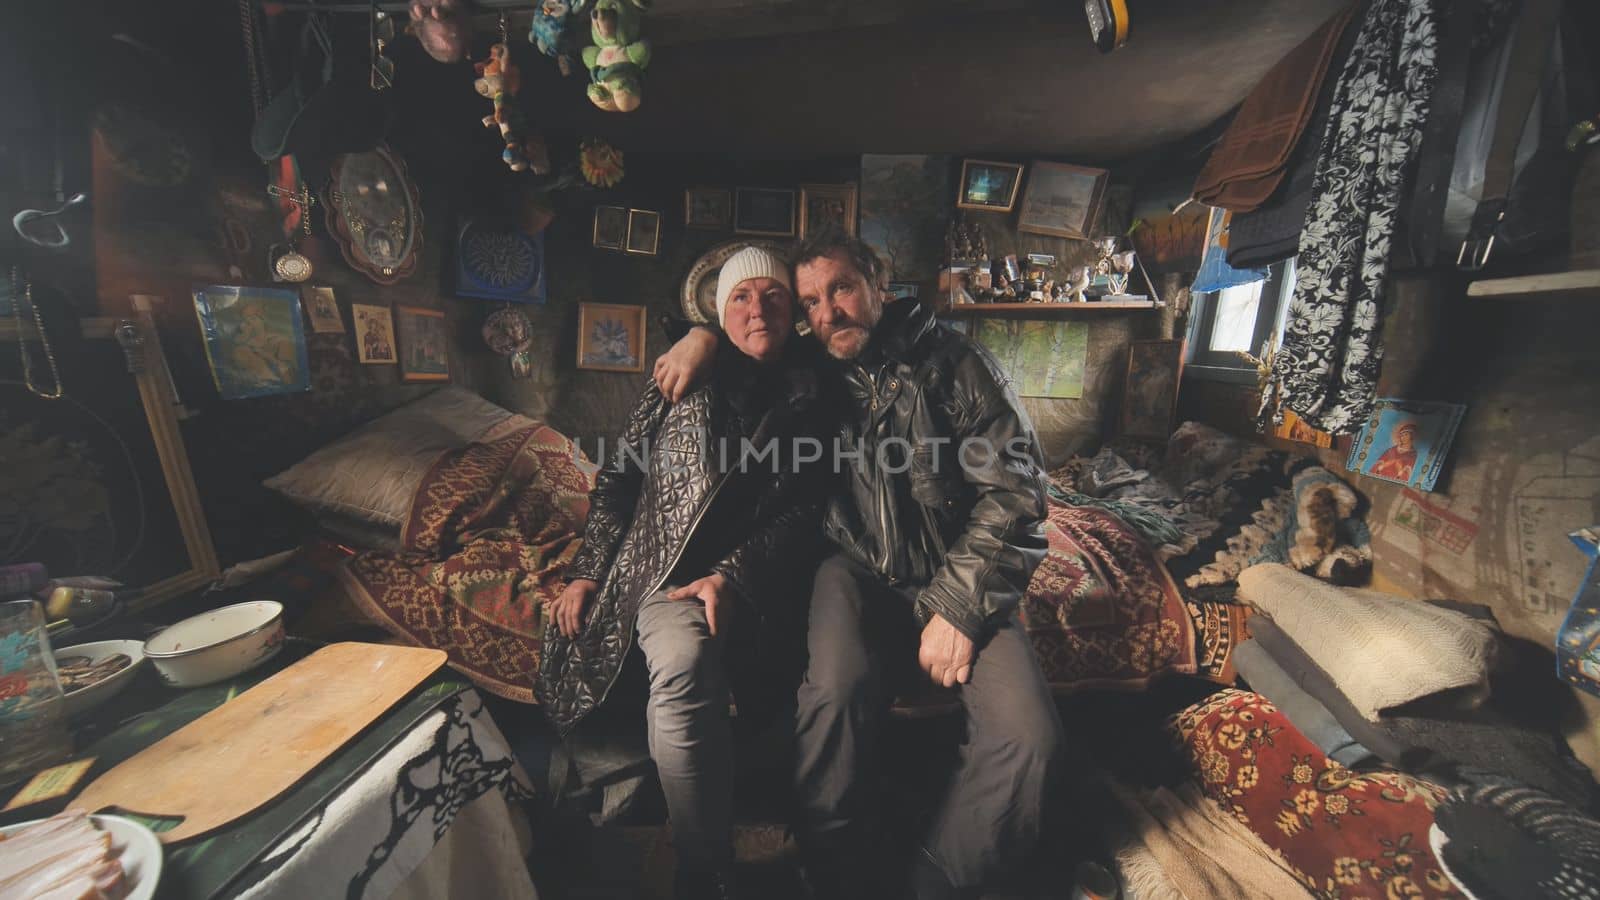 A homeless couple tells a story in their cabin